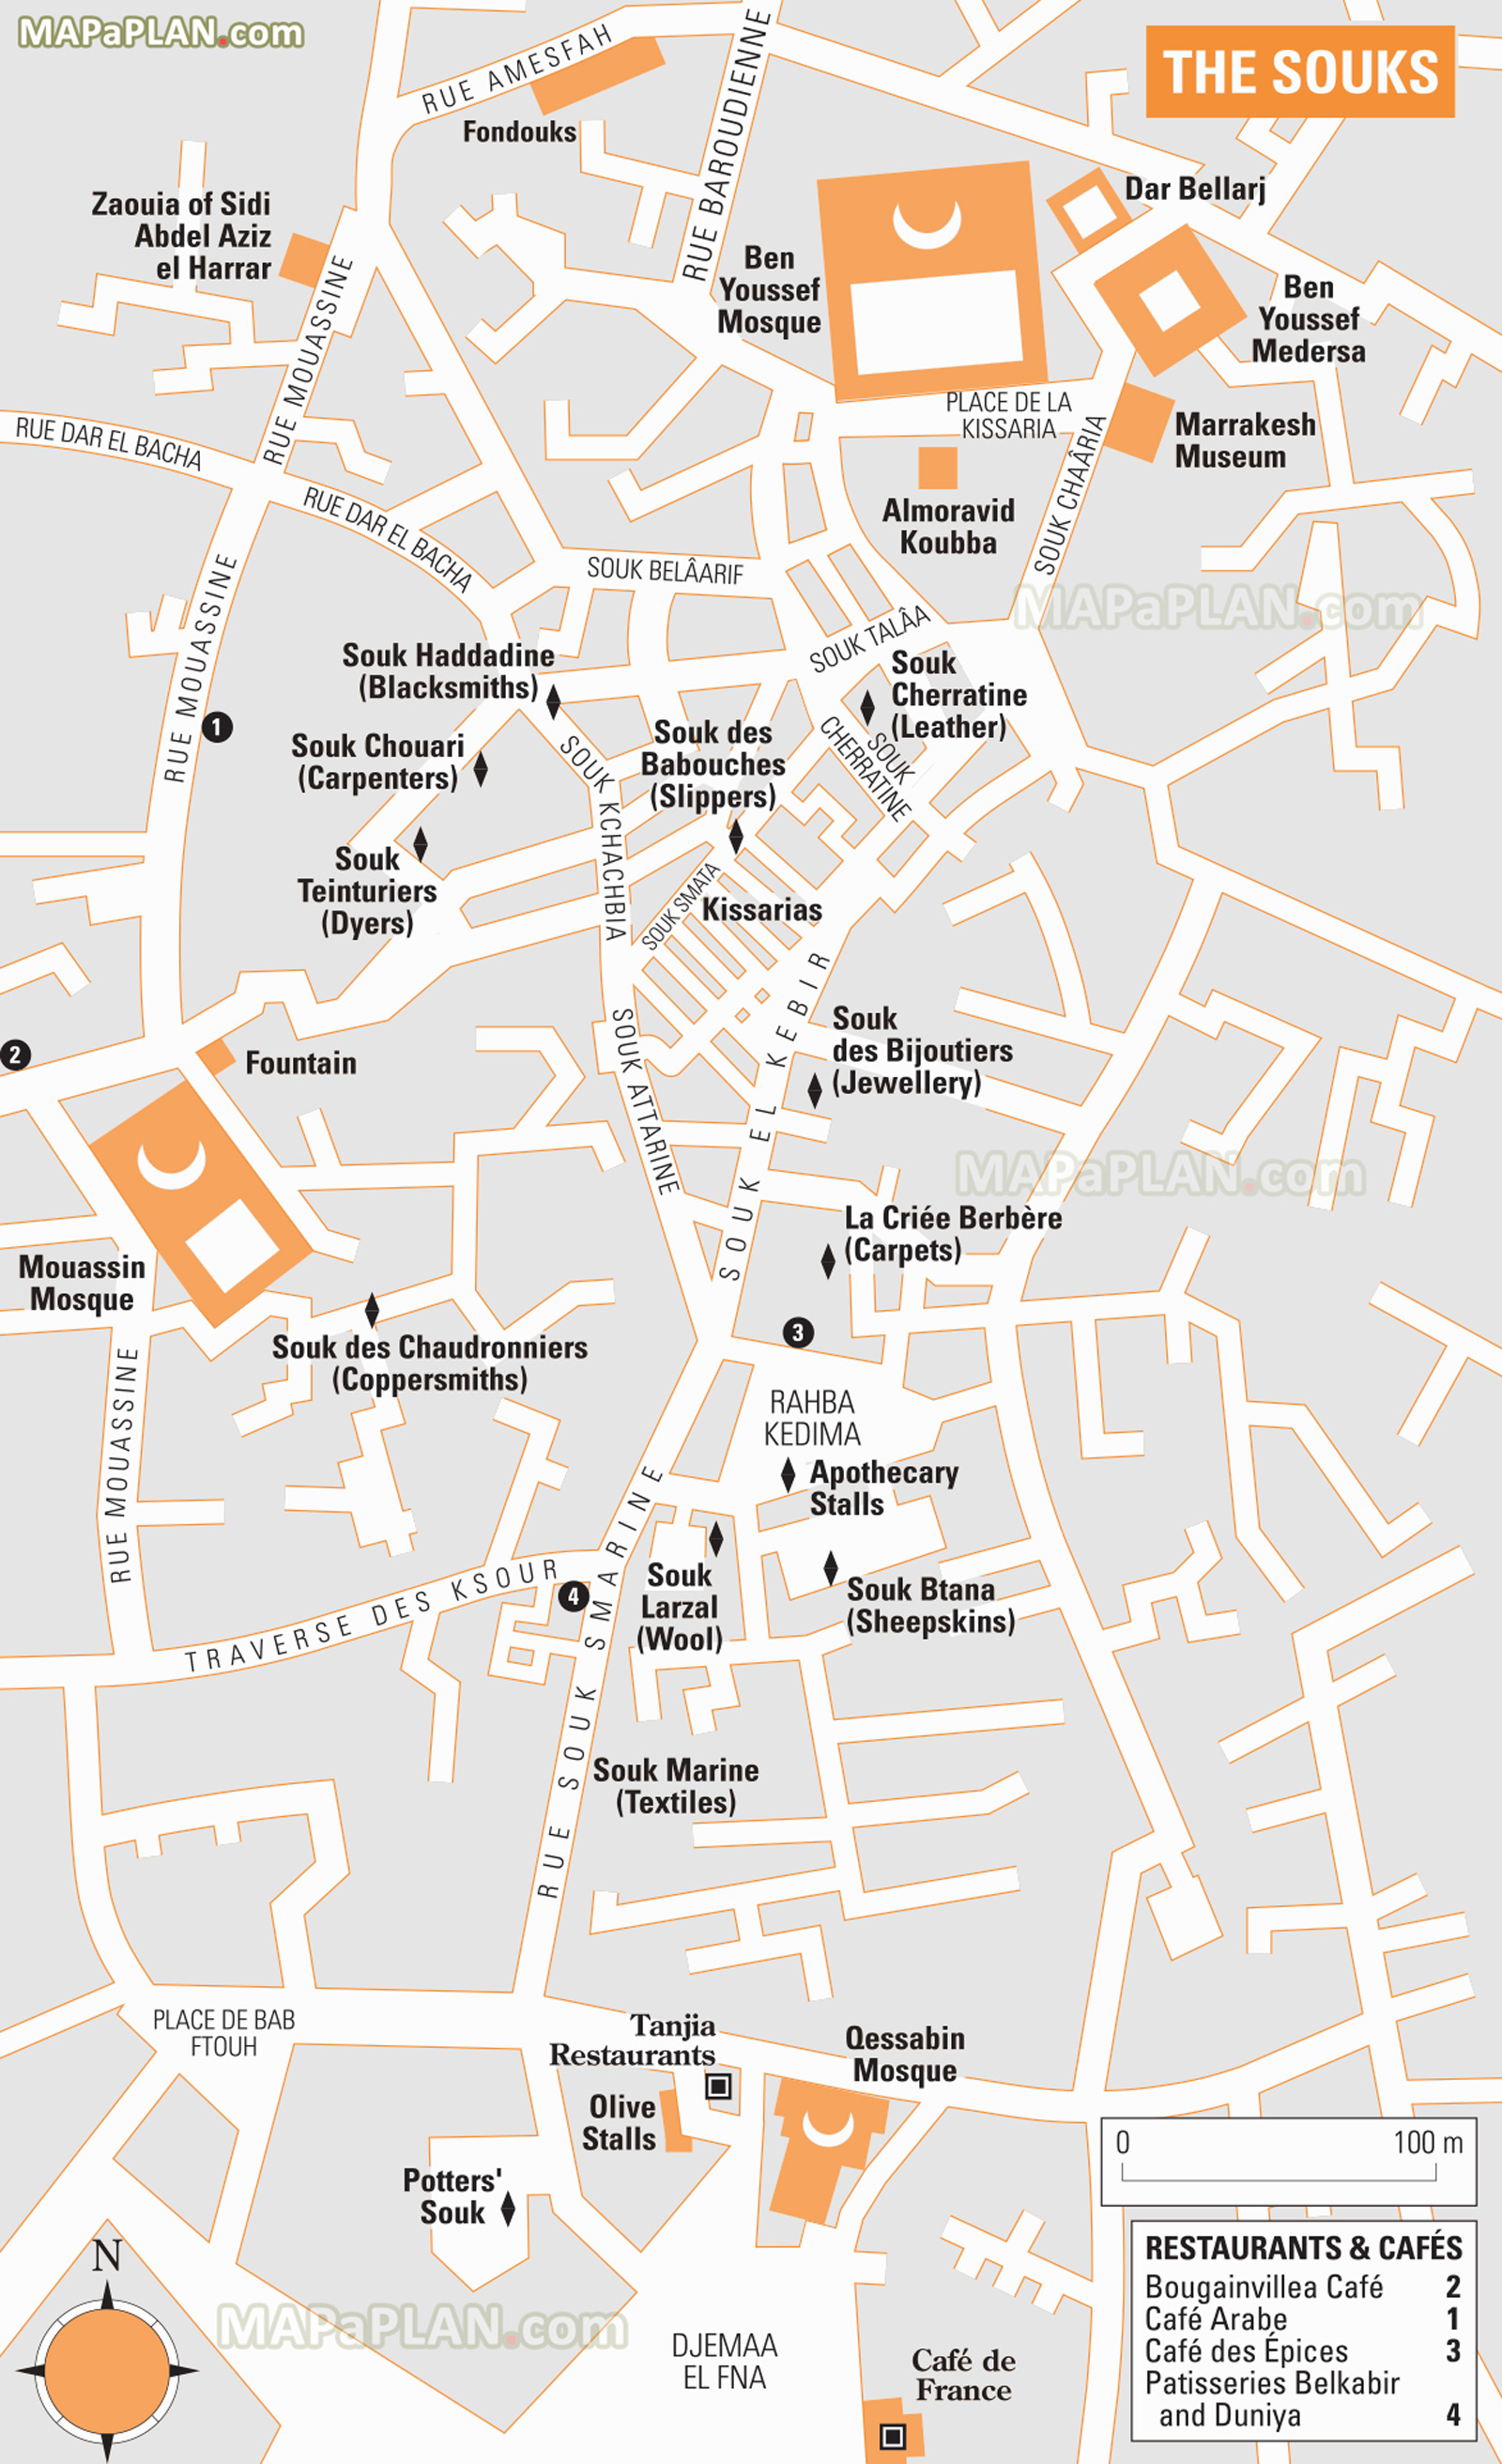 detailed map of famous souks favourite markets must do sites what to see where go do Marrakech top tourist attractions map